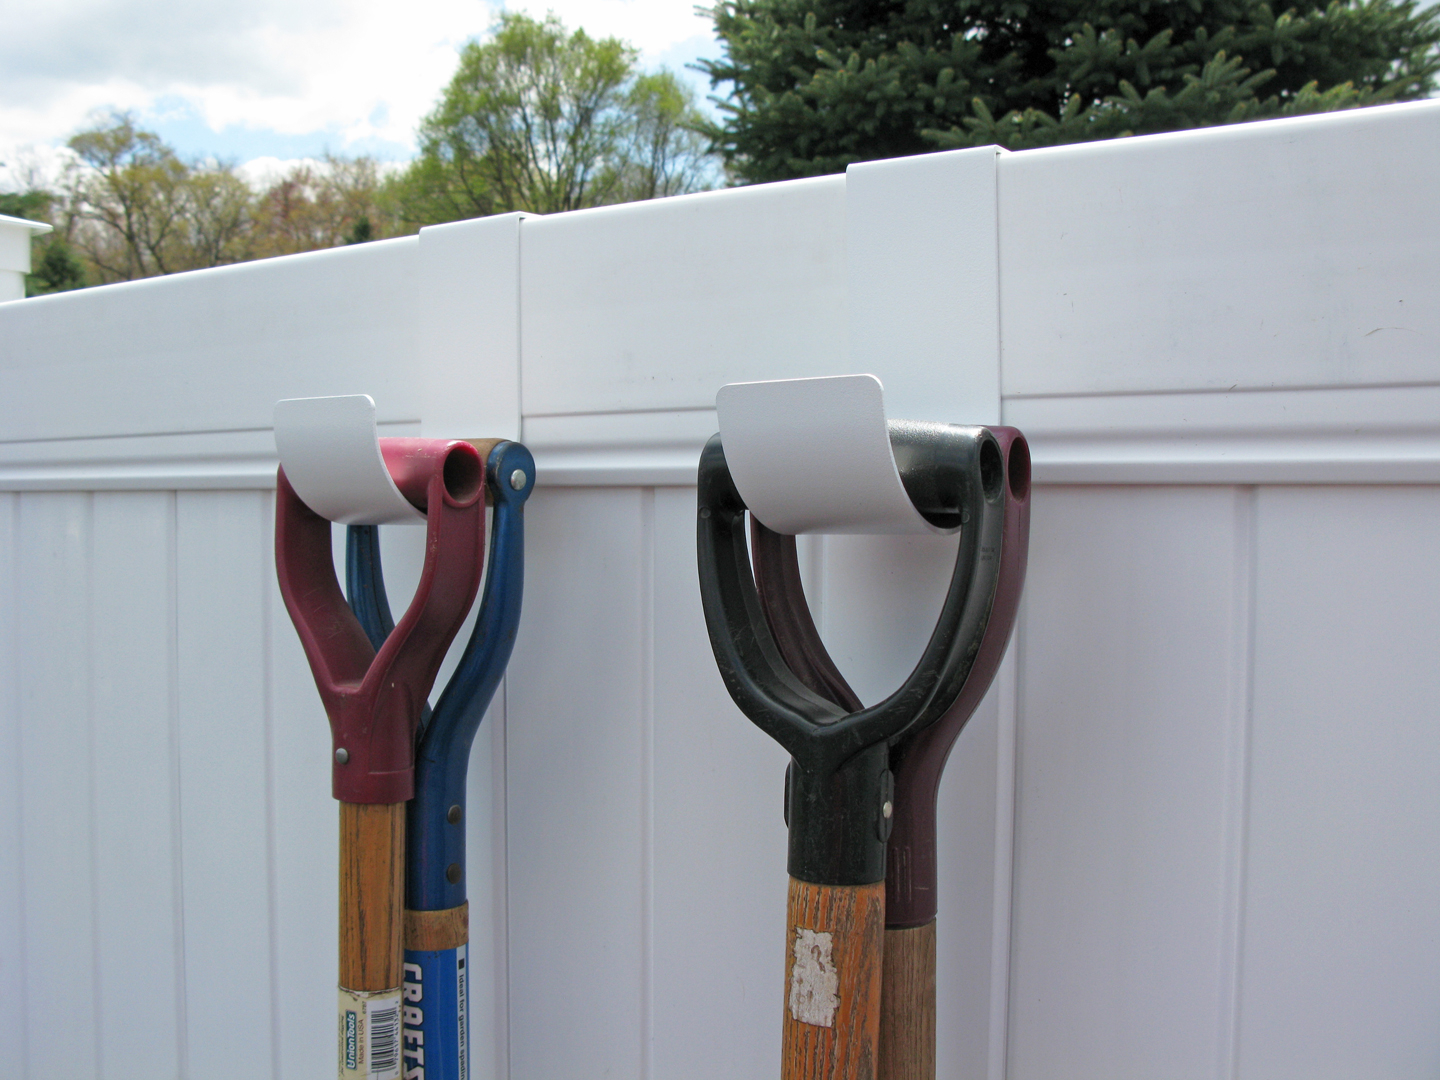 Sheilacakes Fence Hooks Helps Make Organizing Your Yard A Breeze intended for sizing 1440 X 1080